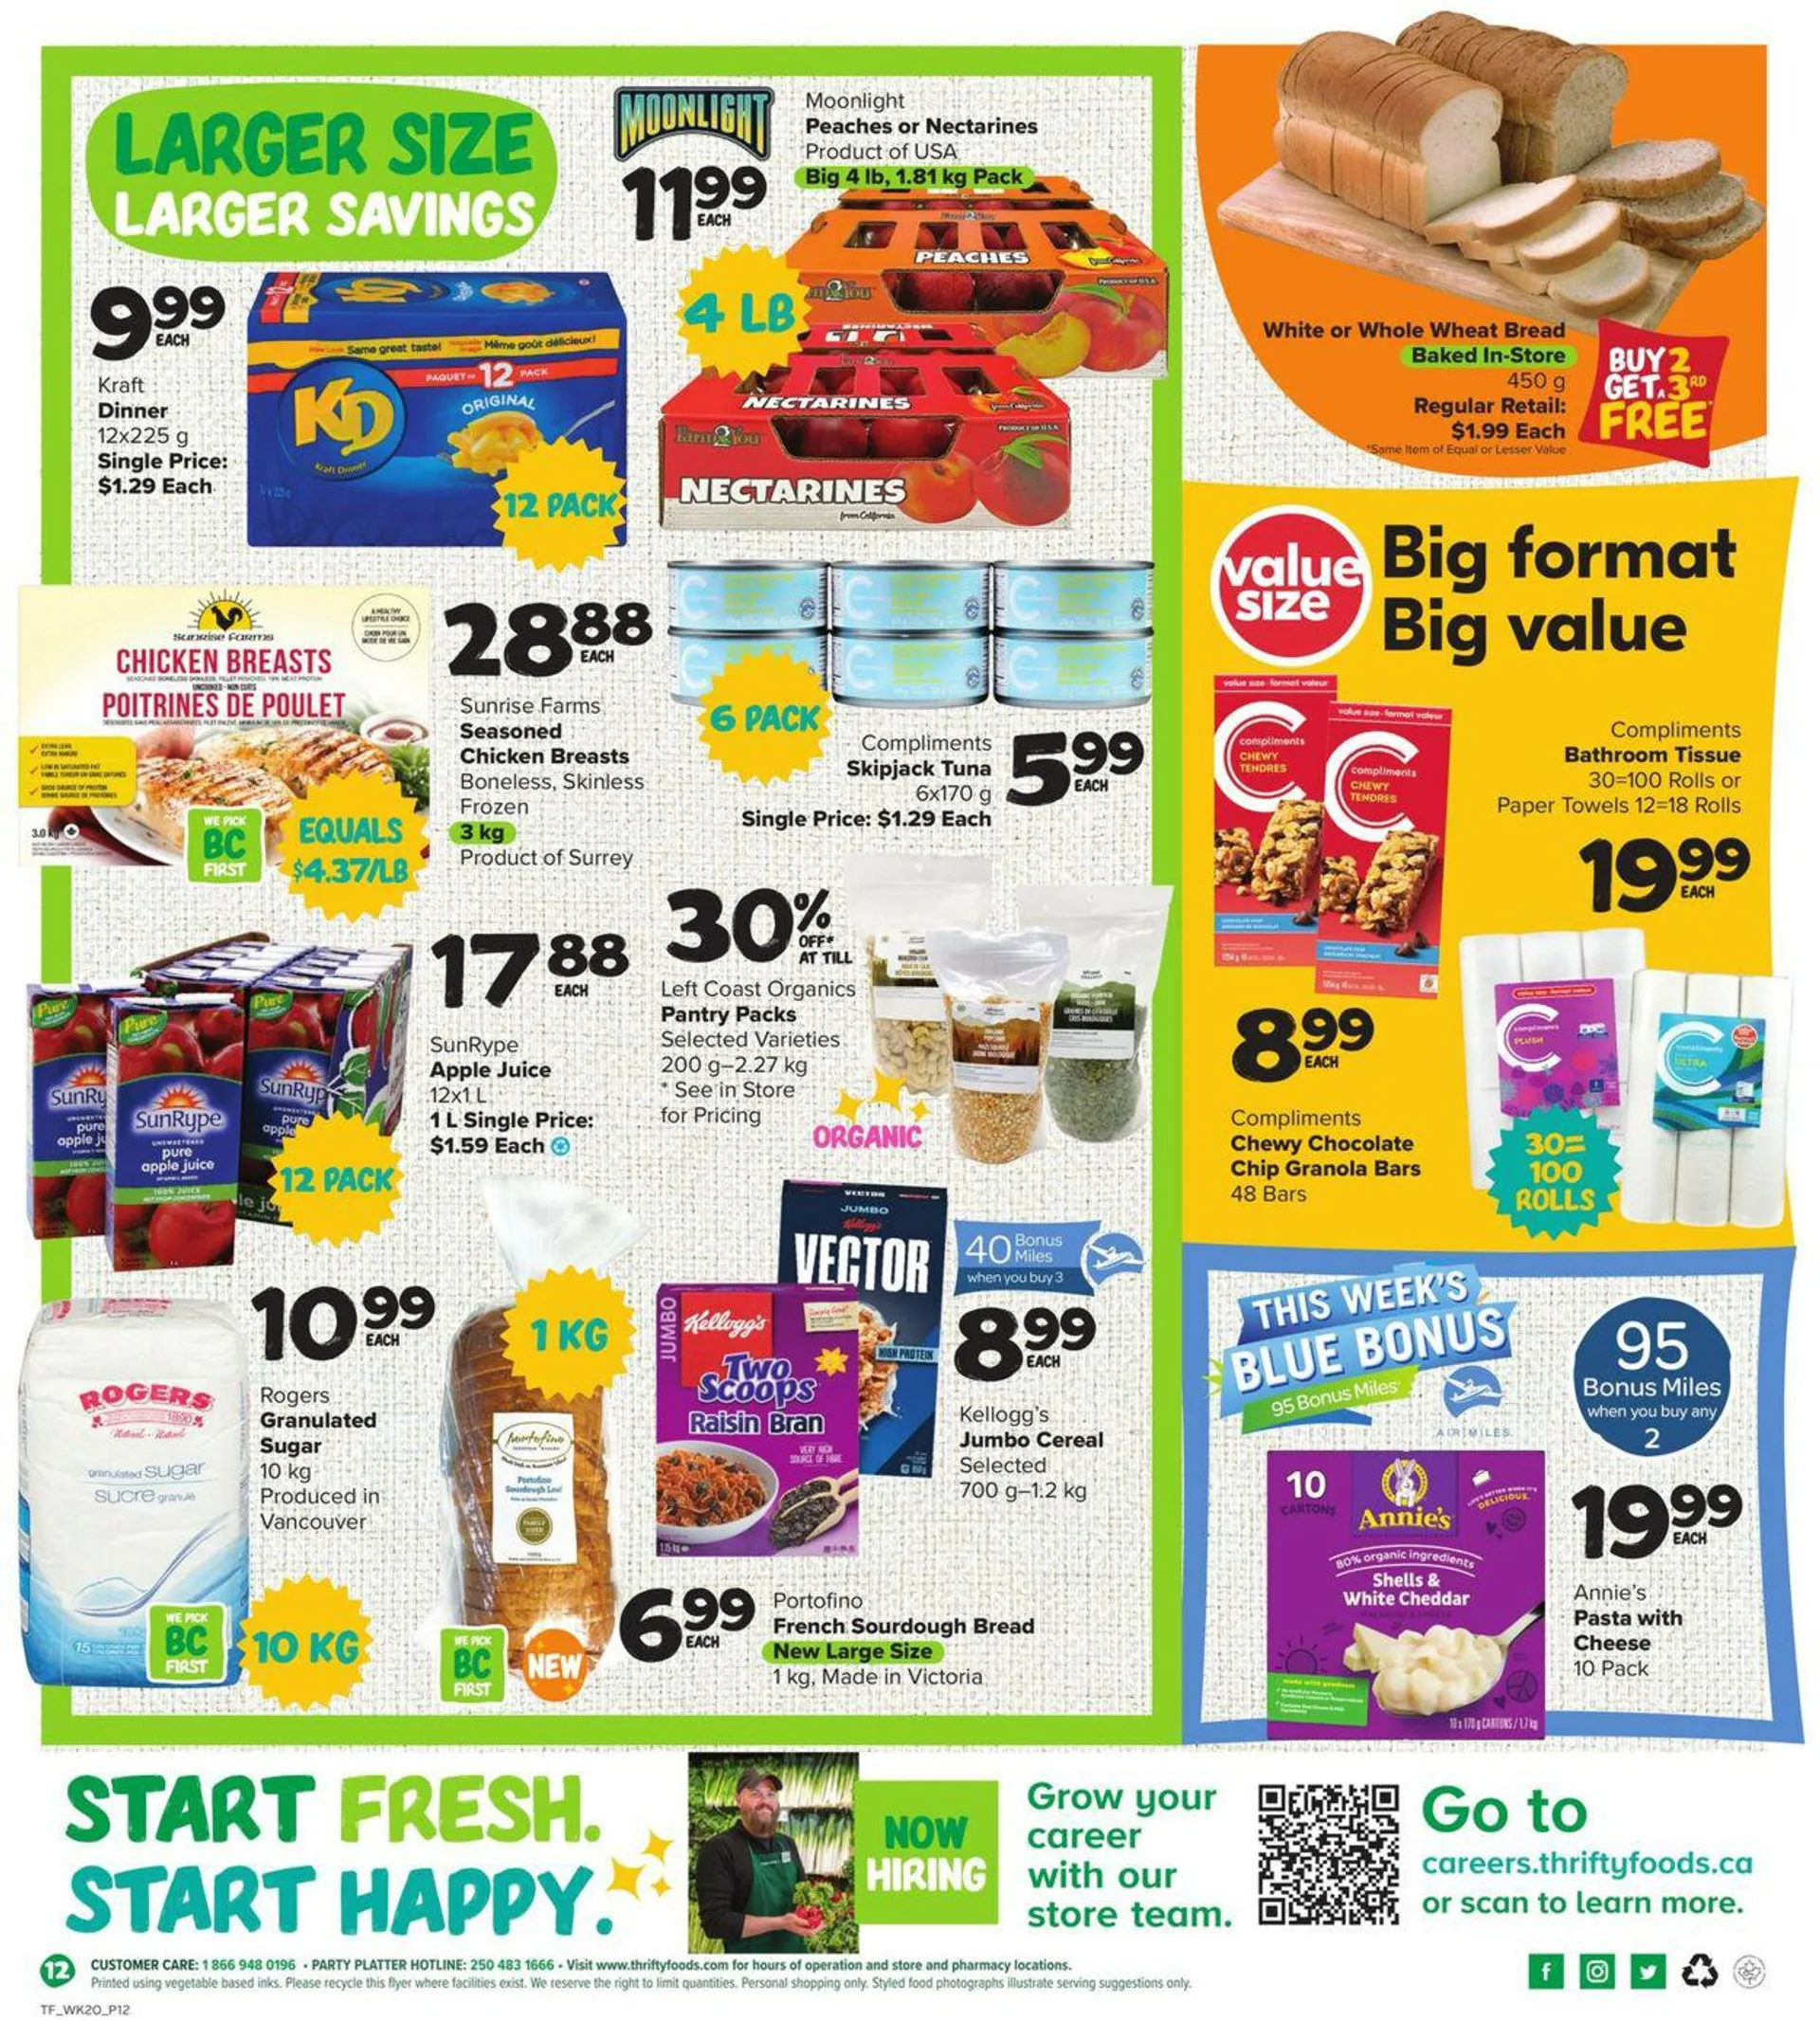 Thrifty Foods Current flyer - 16